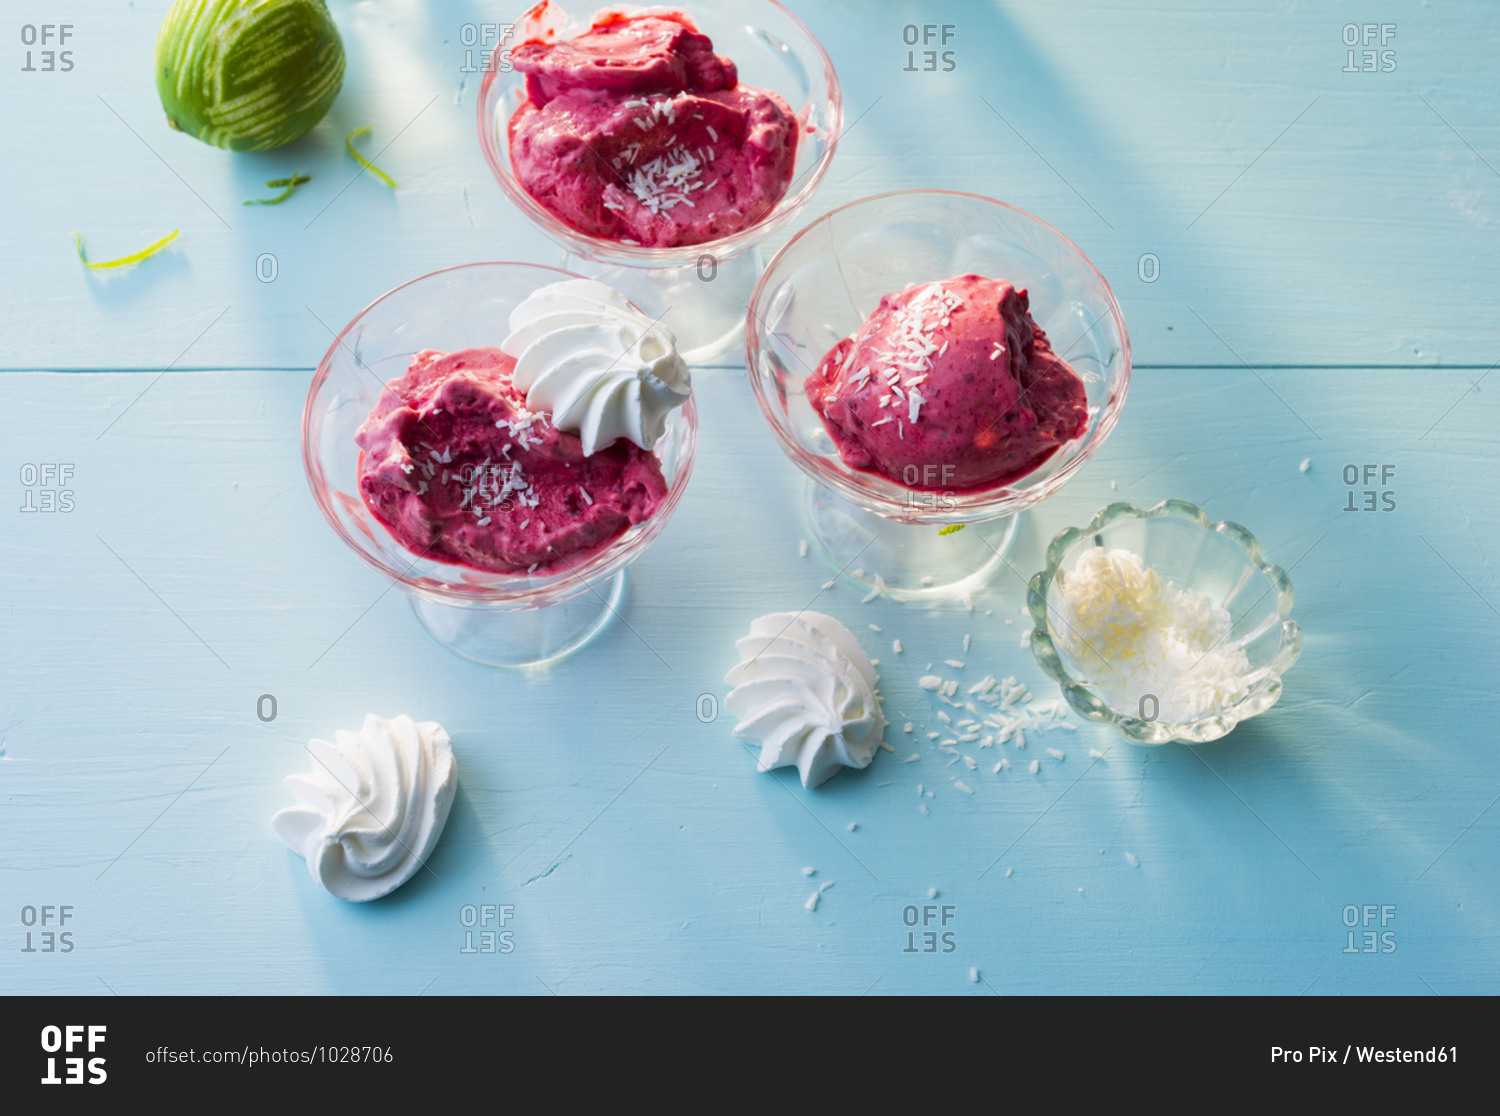 Raspberry ice creams with coconut shreds and meringues